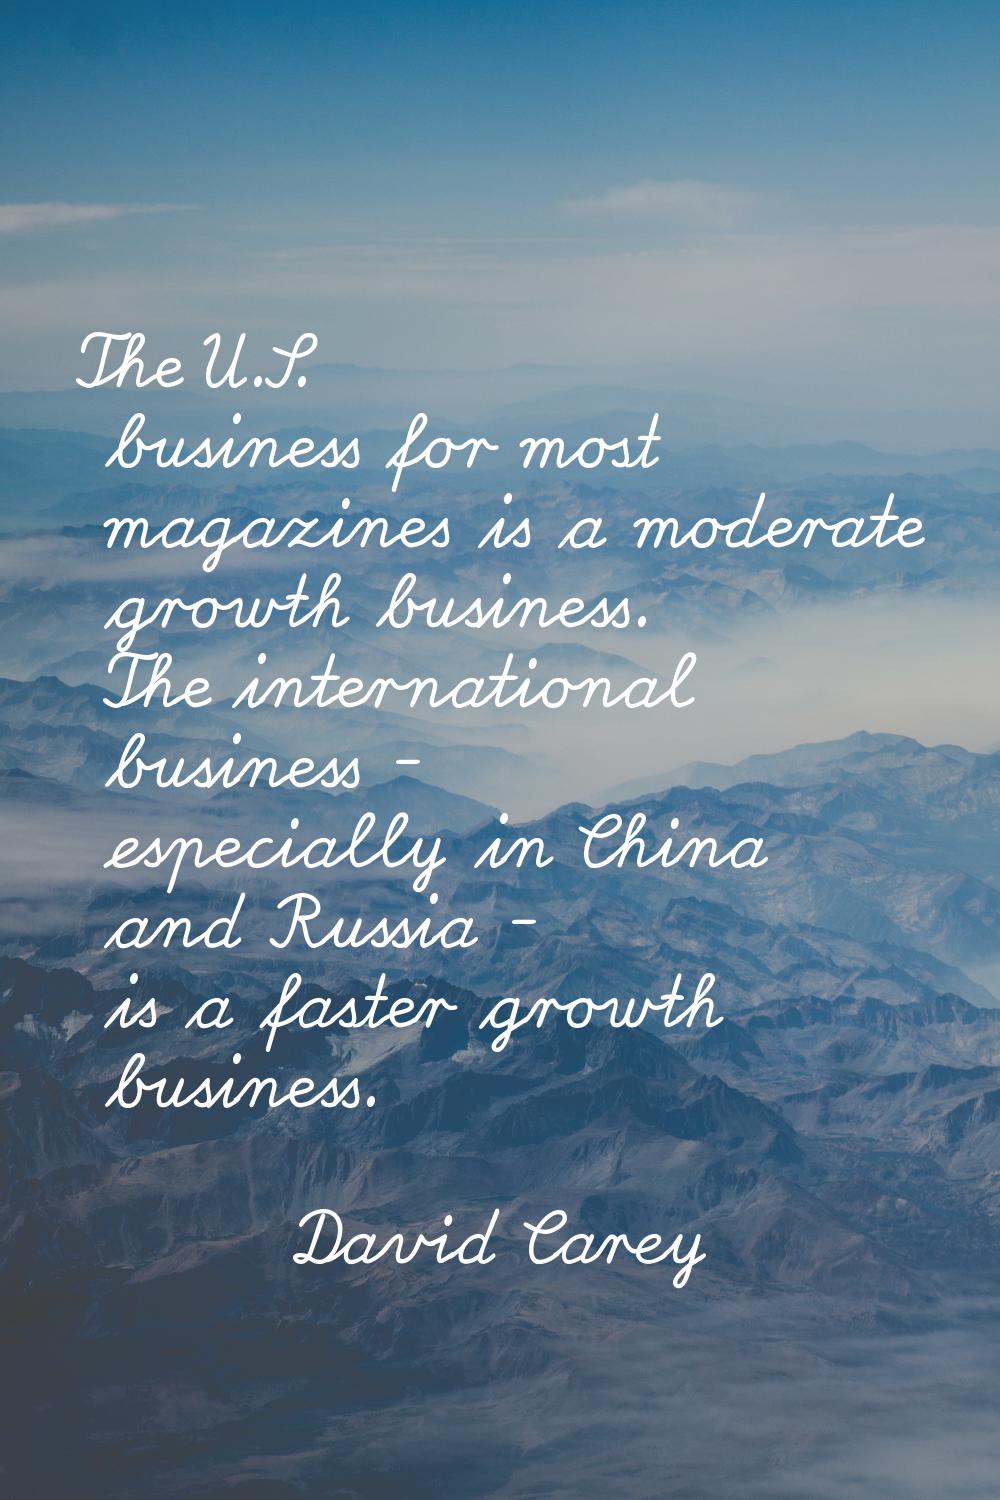 The U.S. business for most magazines is a moderate growth business. The international business - es